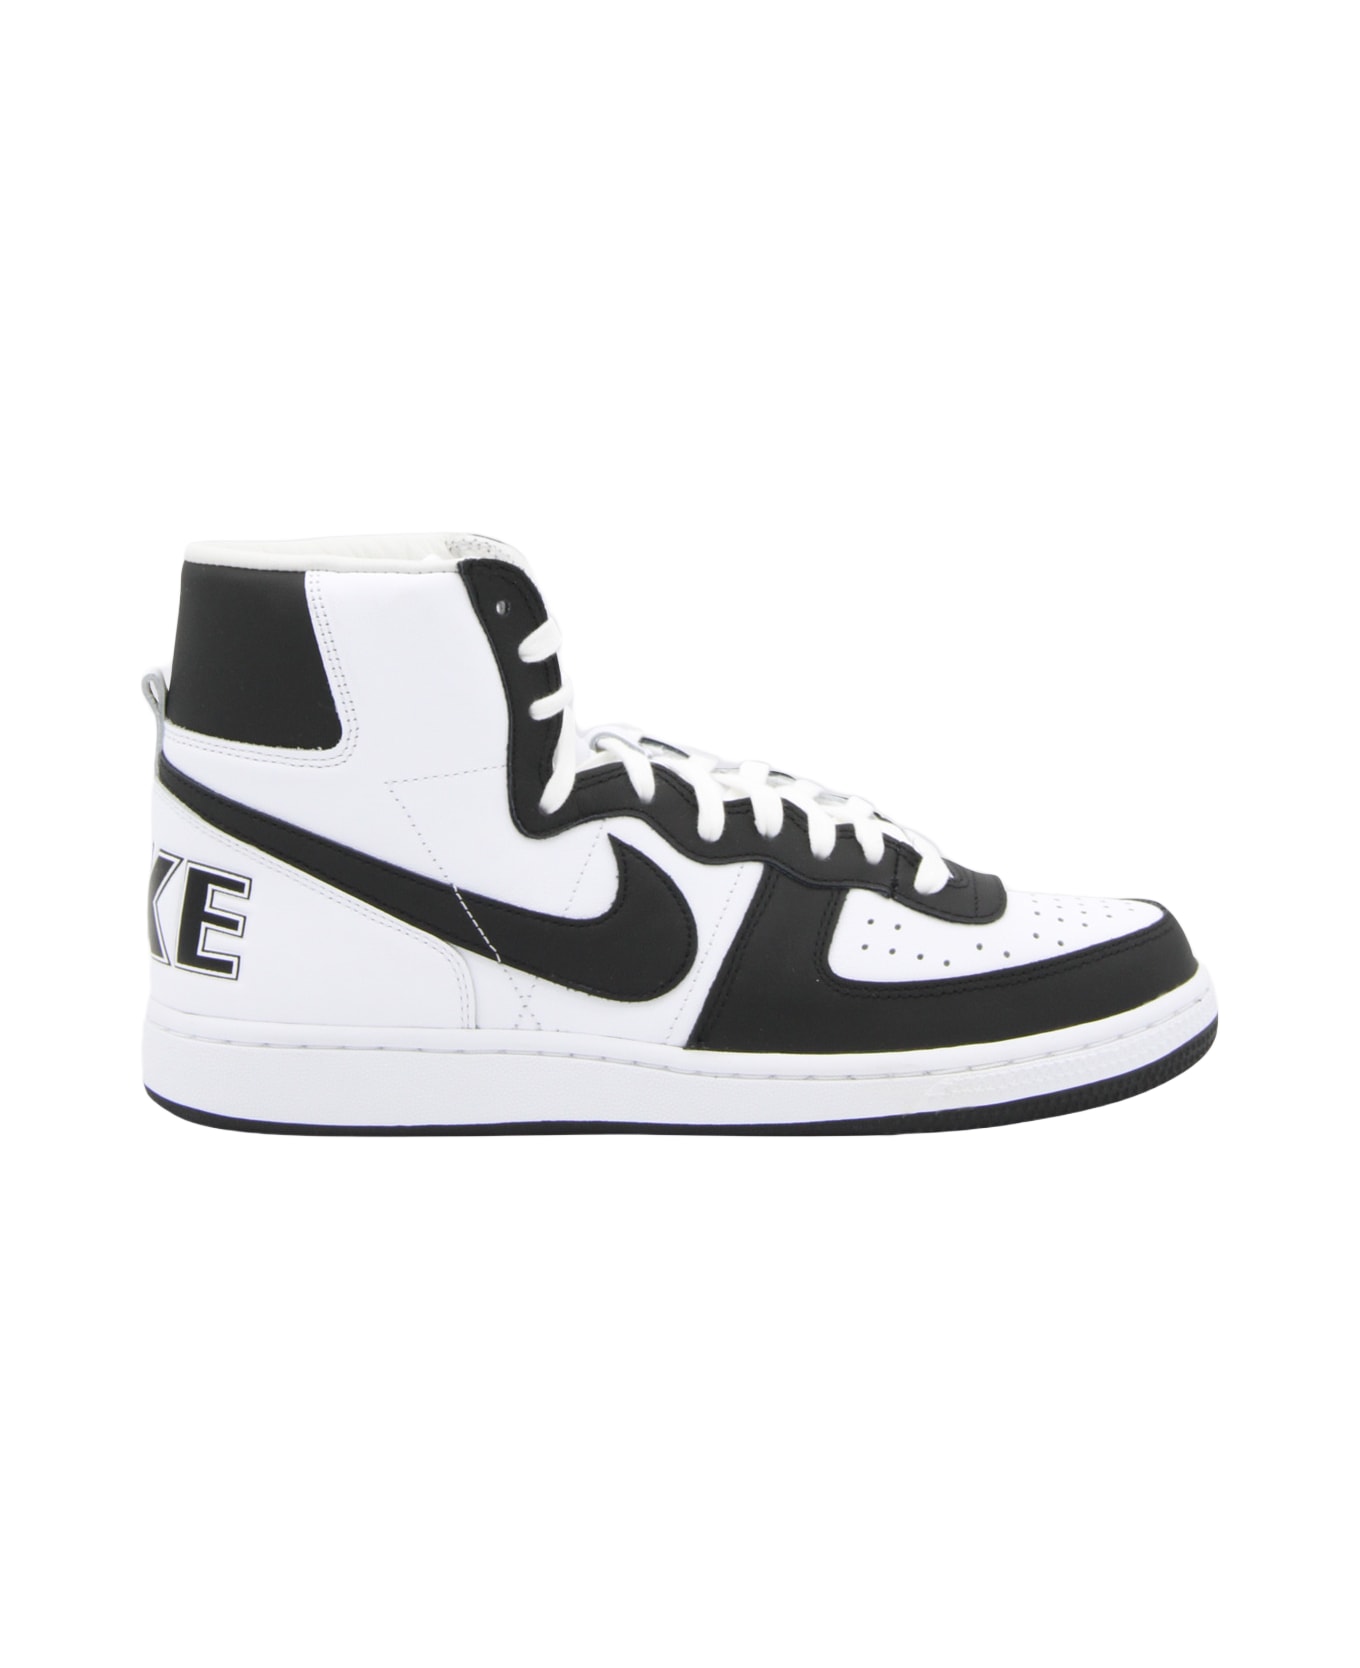 Comme des Garçons White And Black Leather Sneakers - Black